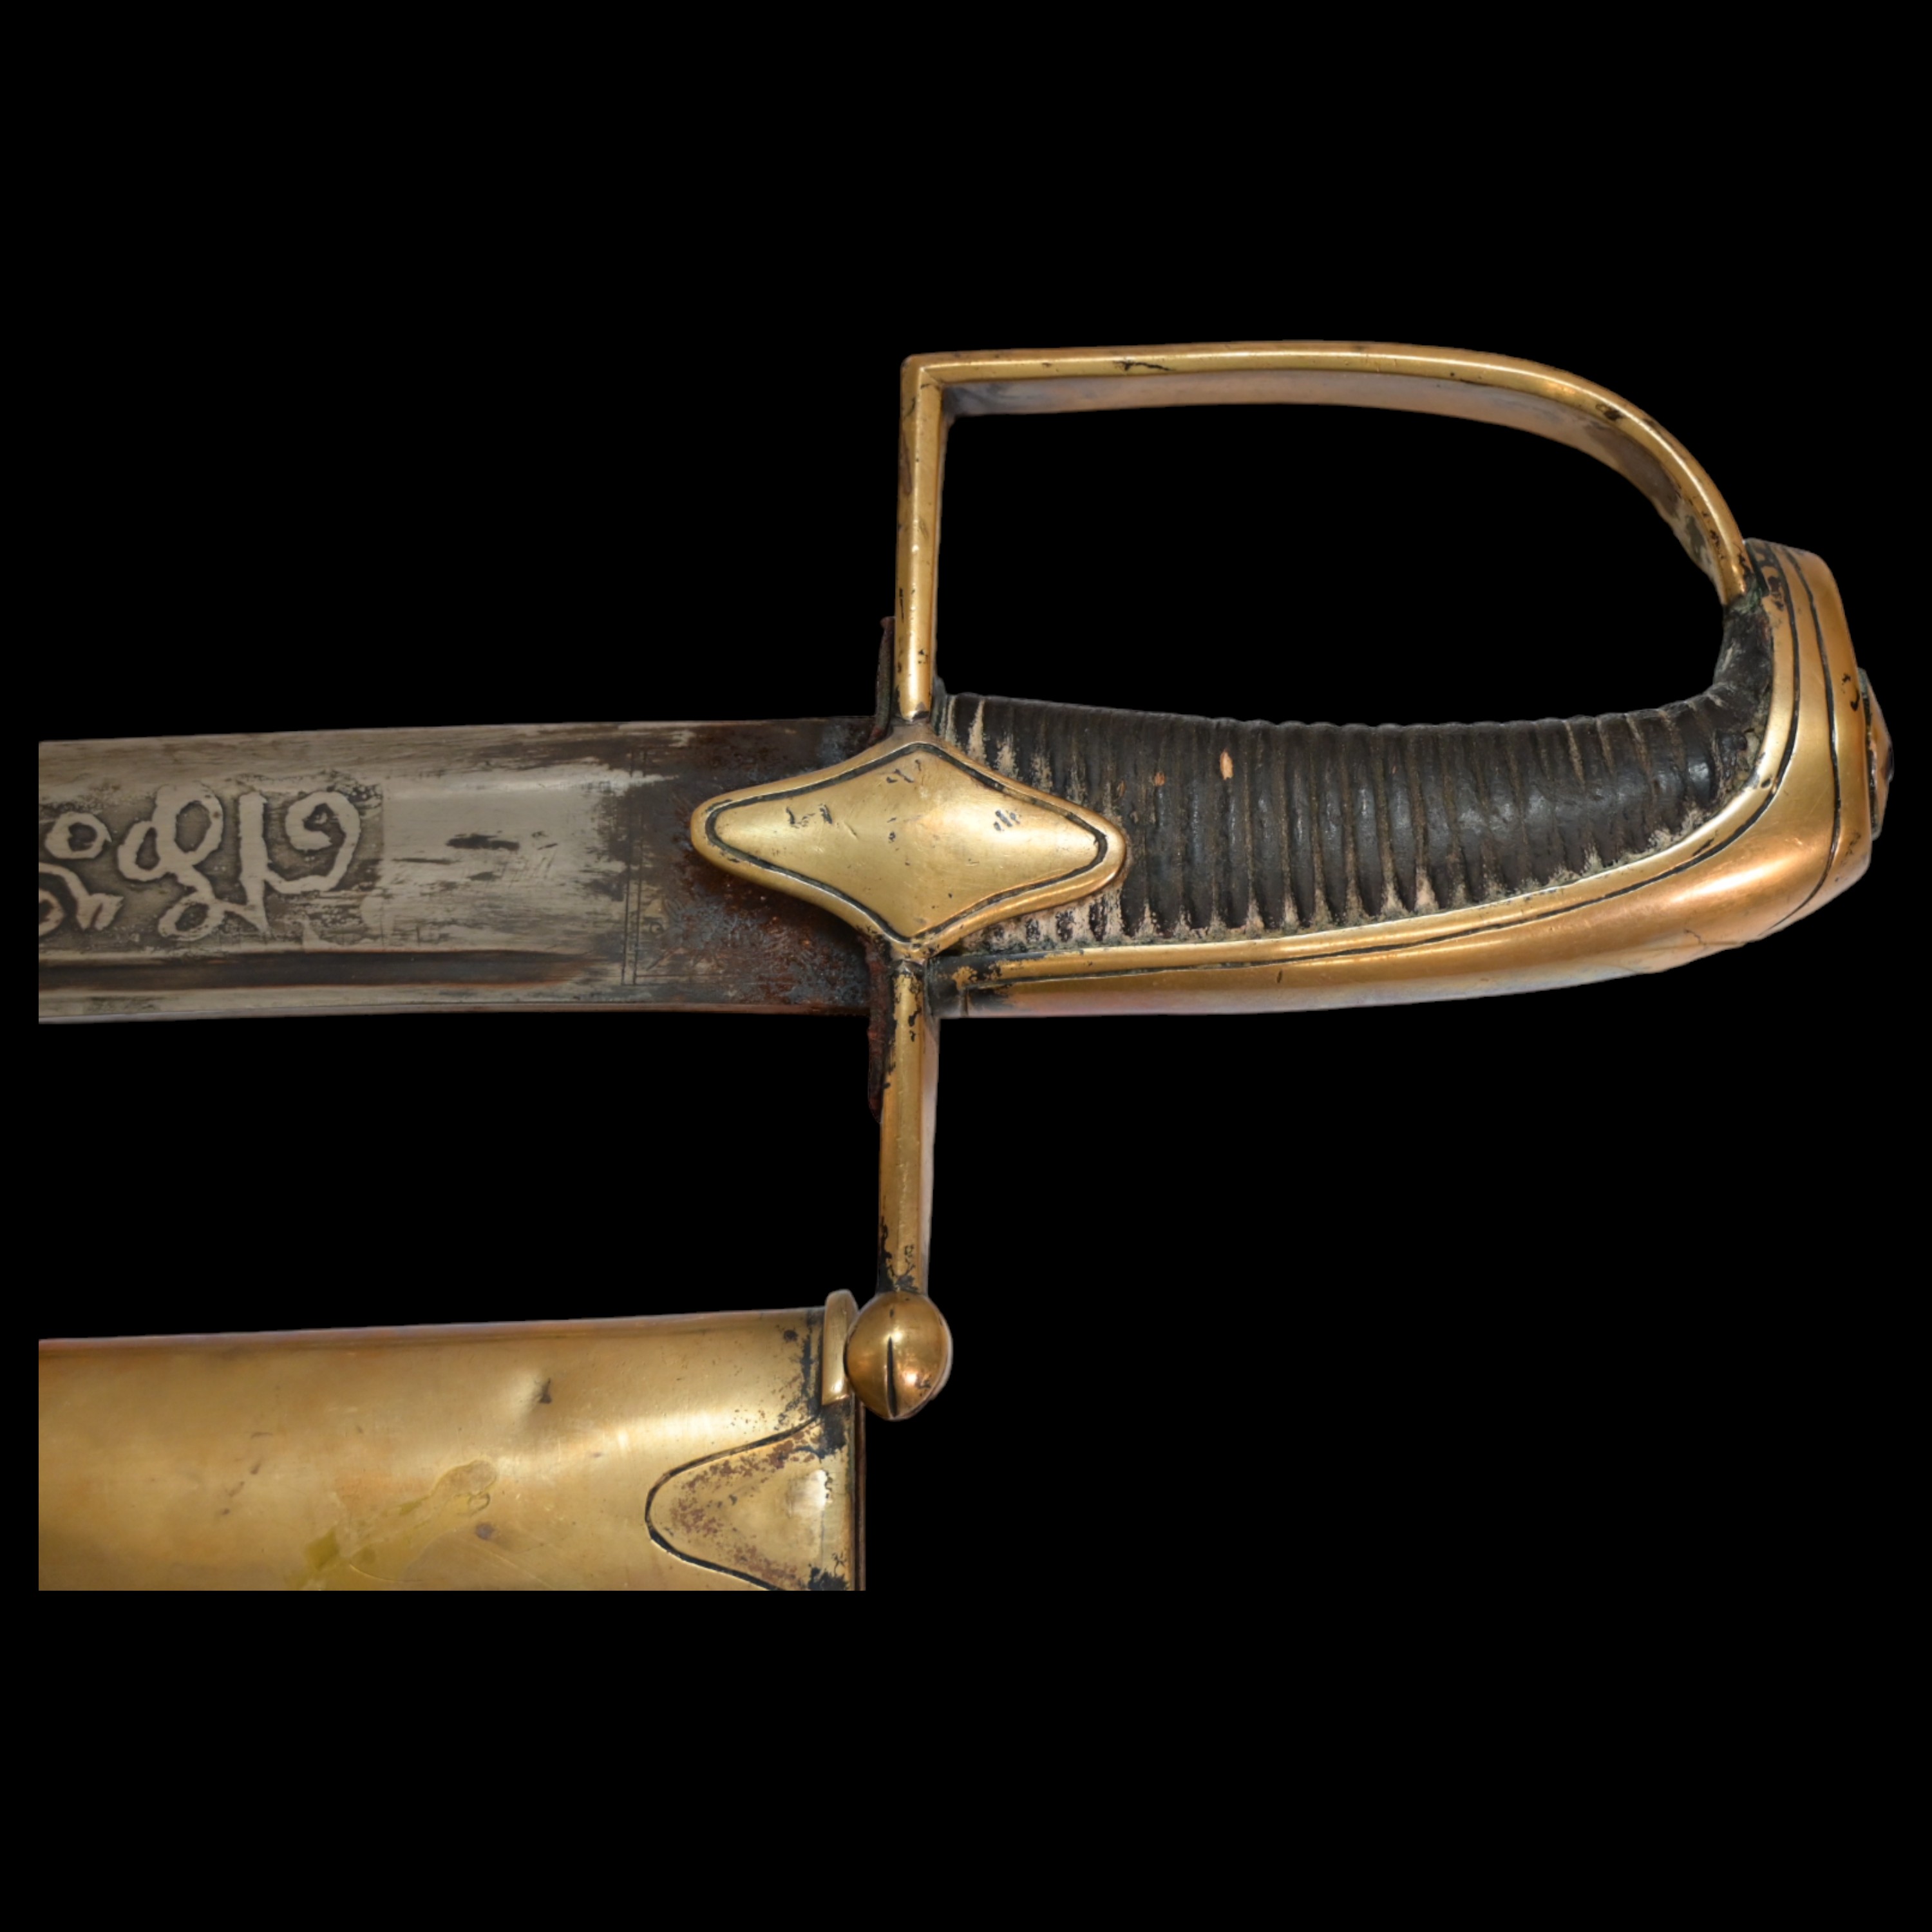 Hussar sabre, France, First Empire period, early 19th century. - Image 5 of 11